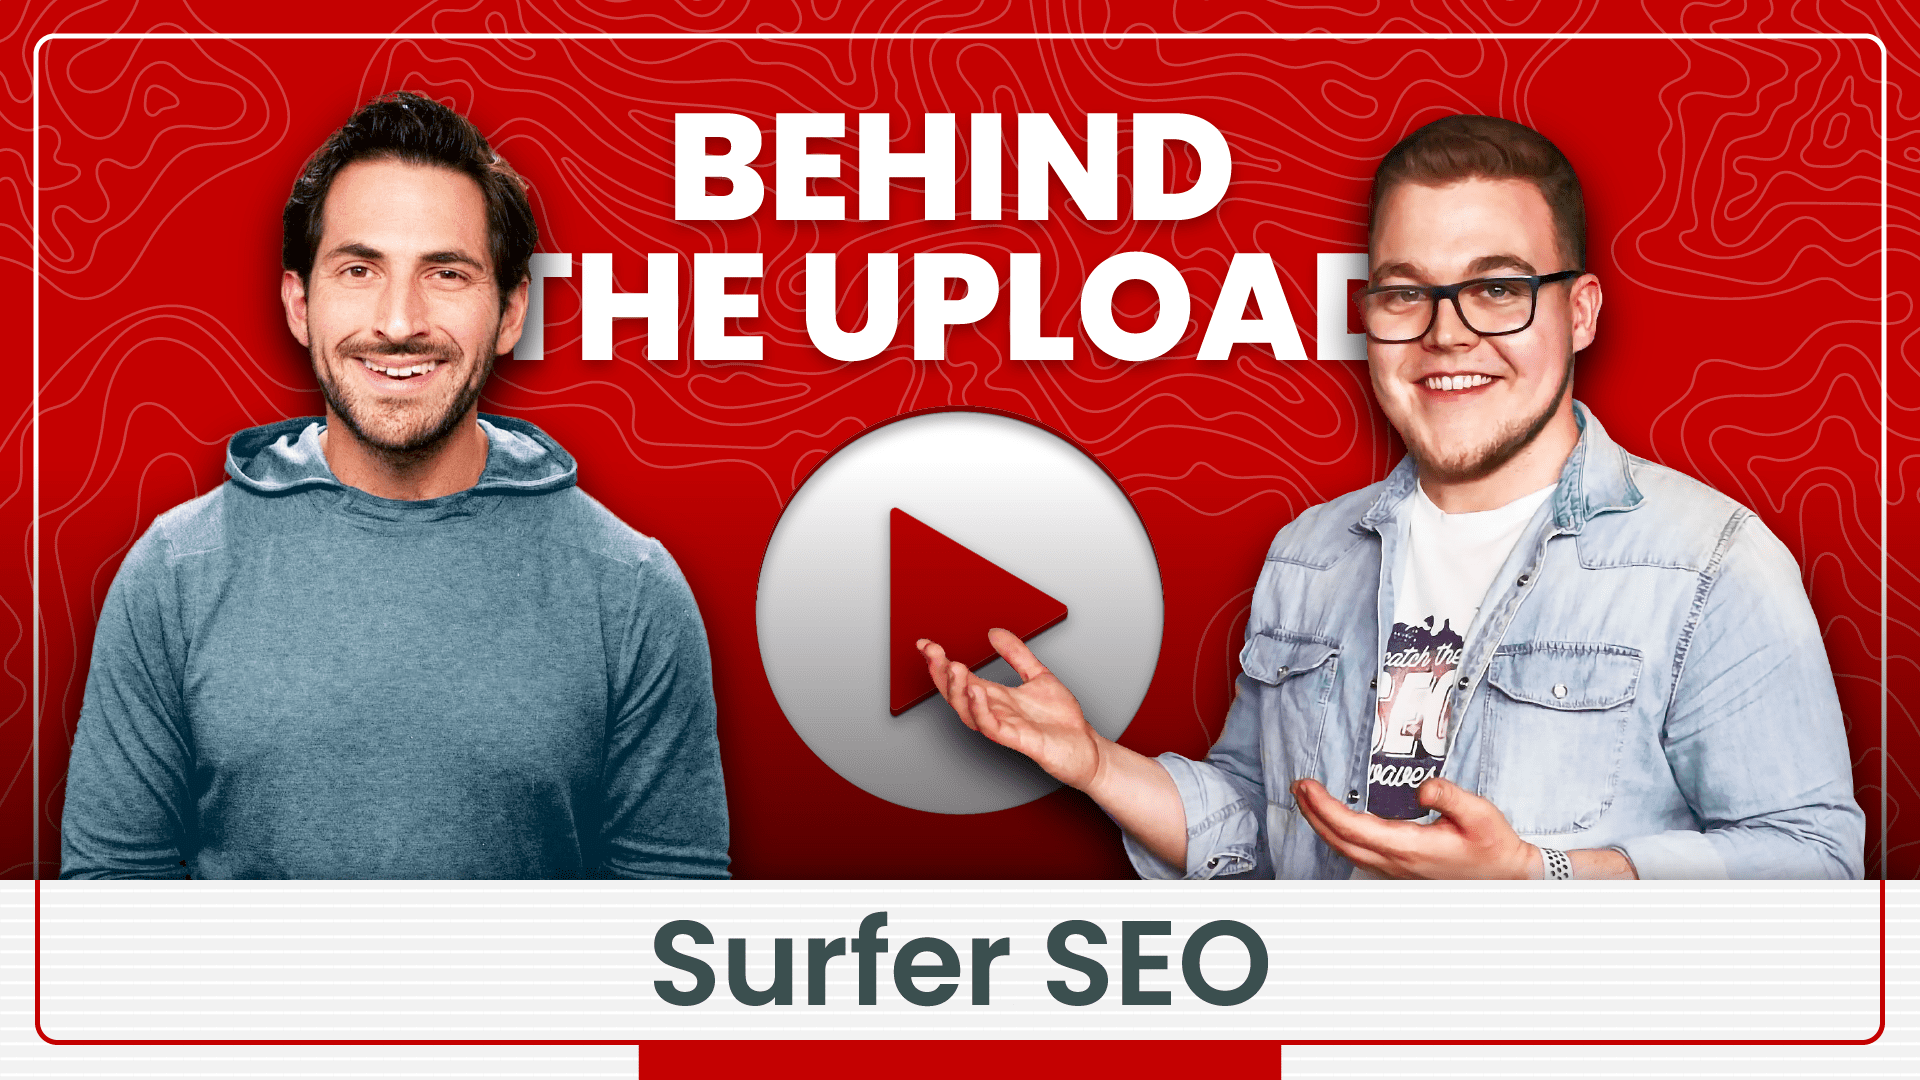 Surfer SEO episode title with pictures of Joey and Tomasz